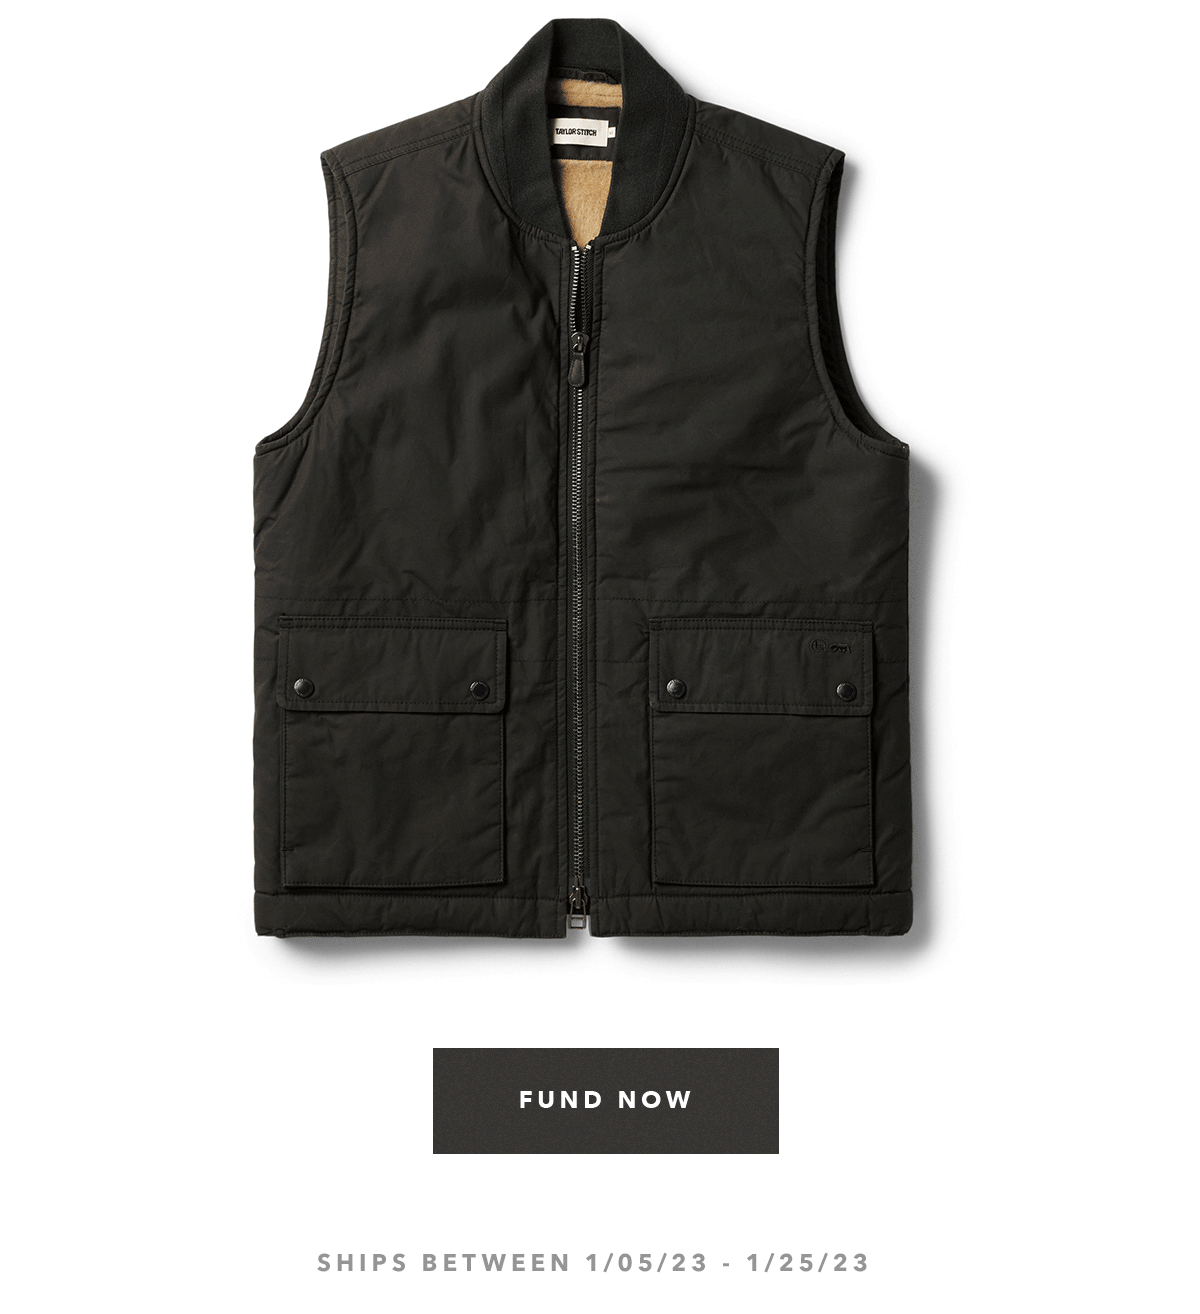 The Ignition Vest in Coal Dry Wax